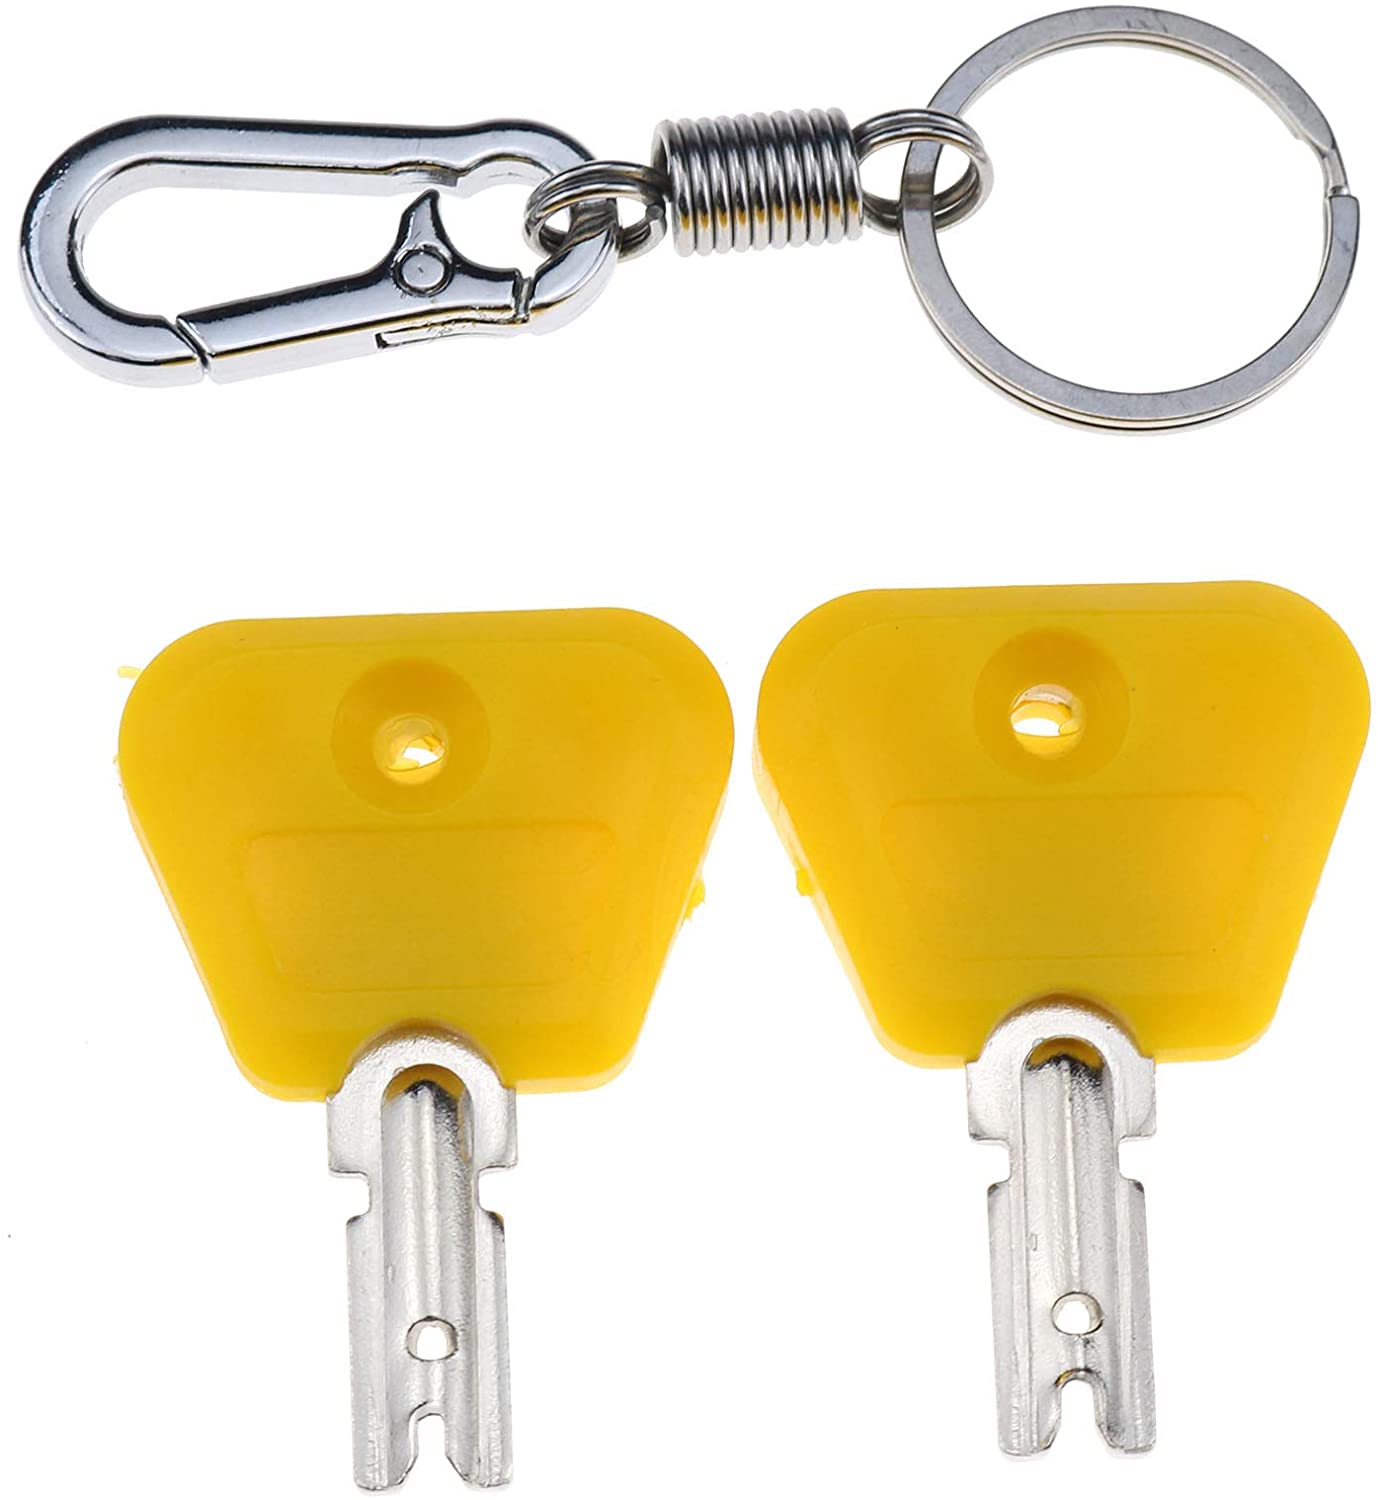 2X Ignition Keys with Key Chain Fit for Yale Clark Hyster Forklift Ignition Switch 2368655 2782017 7004147 - KUDUPARTS